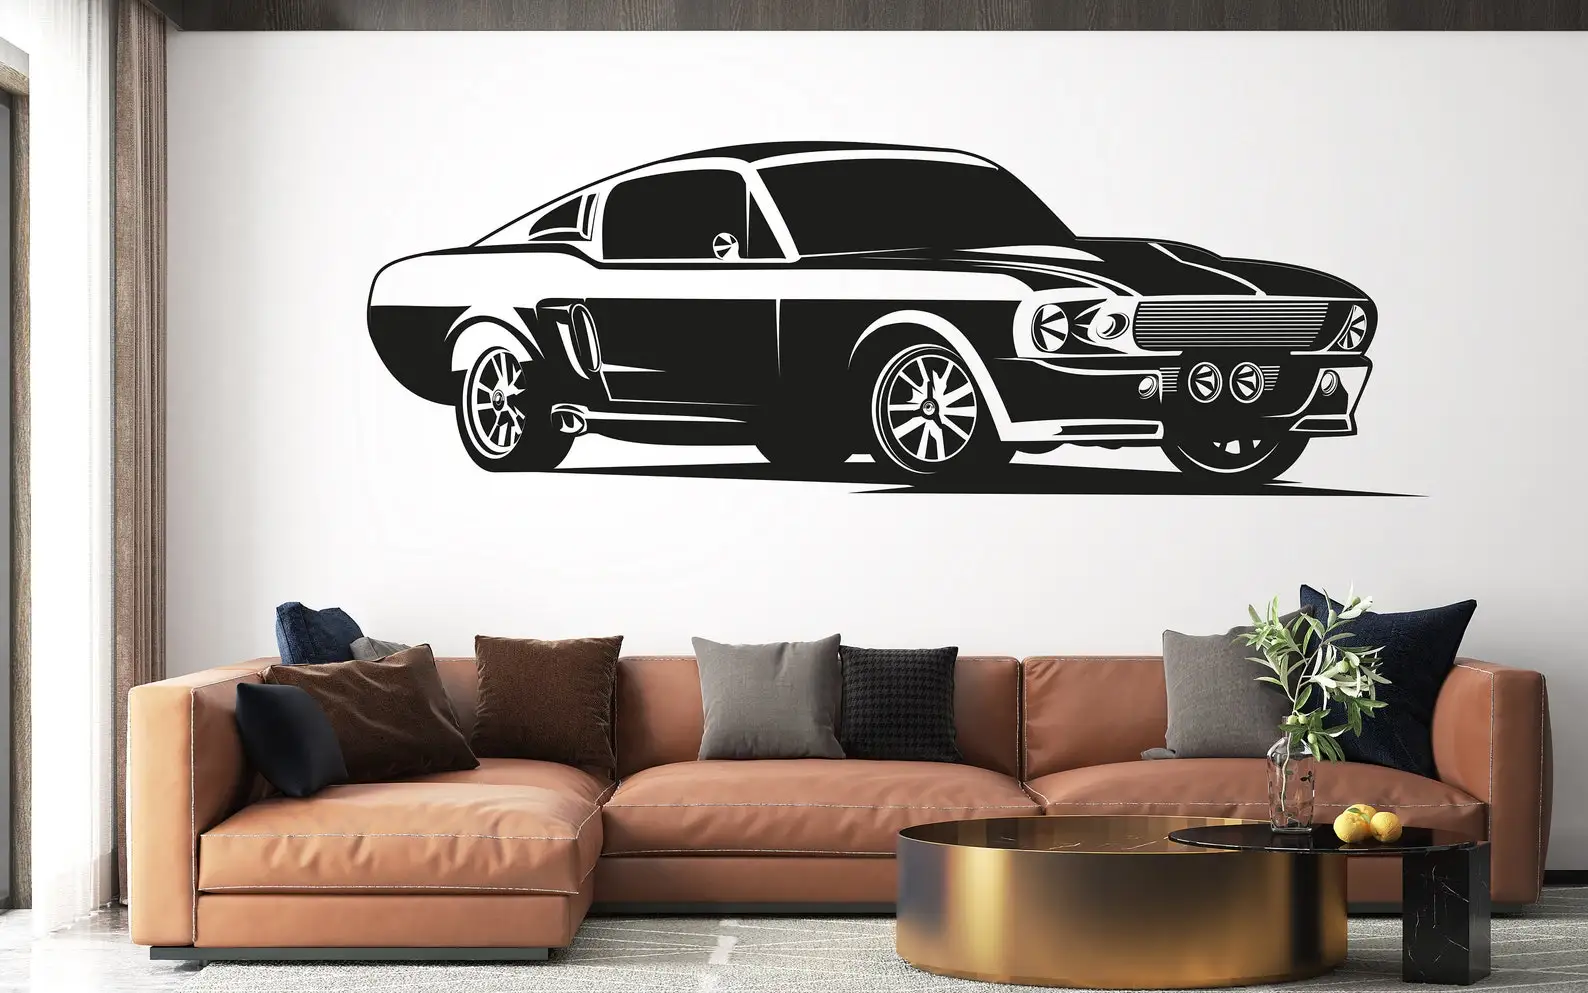 Vinyl Decals Ford Mustang Muscle Car Sports Car Wall Stickers Vintage Car Wall Stickers Car Wall Stickers Home Fashion Decor c10